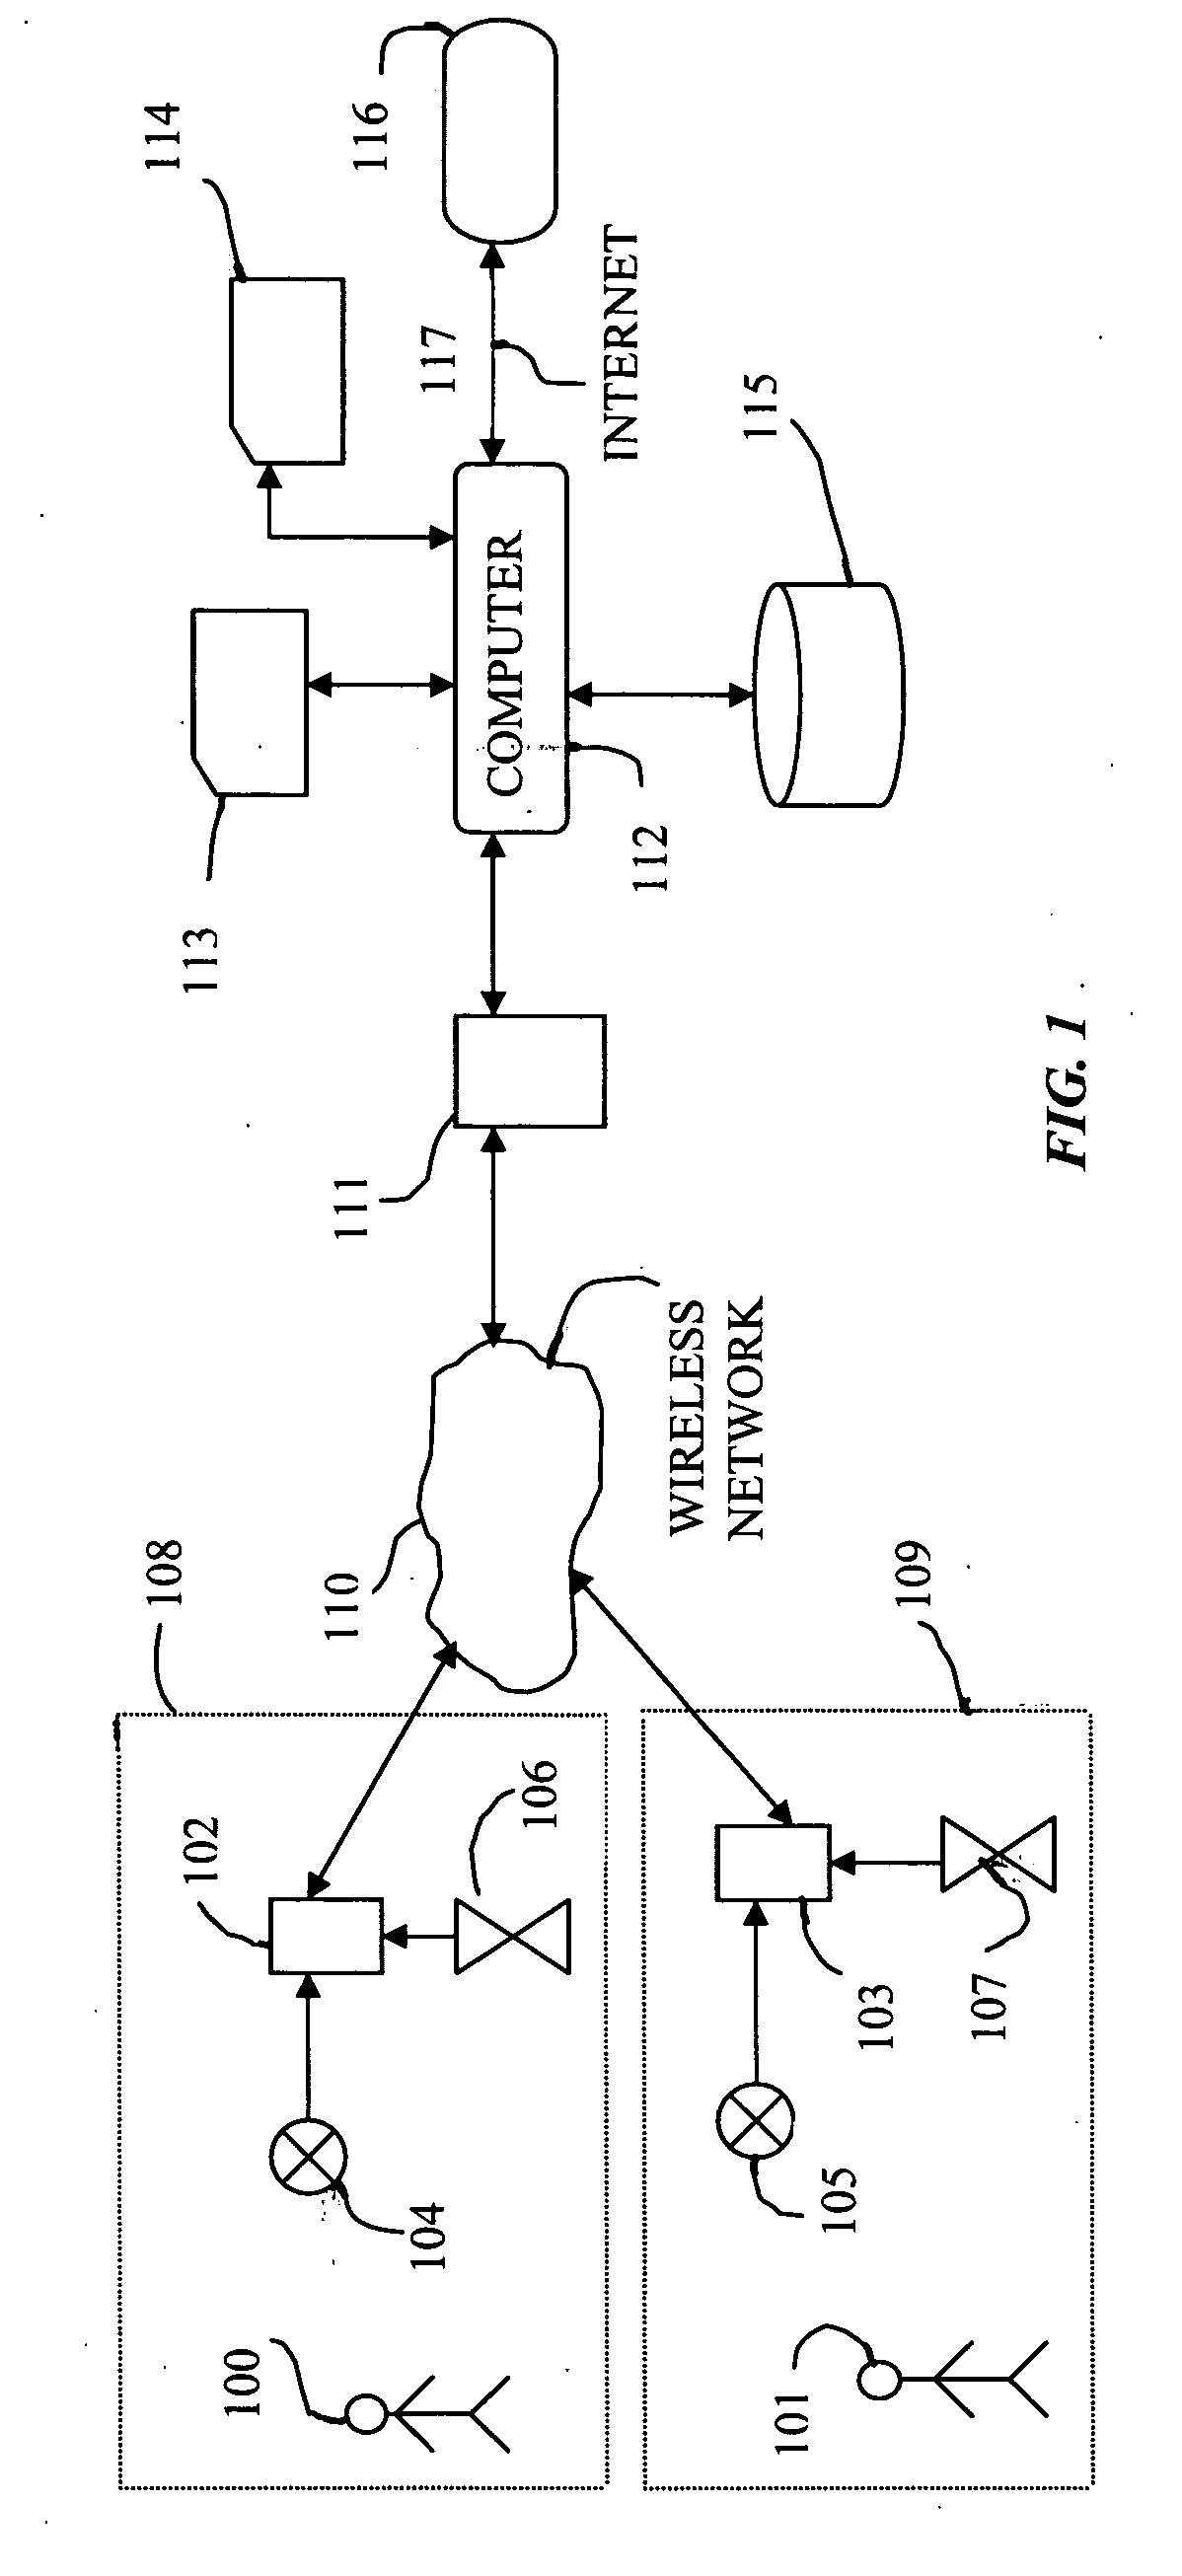 System and method for collecting and disseminating human-observable data